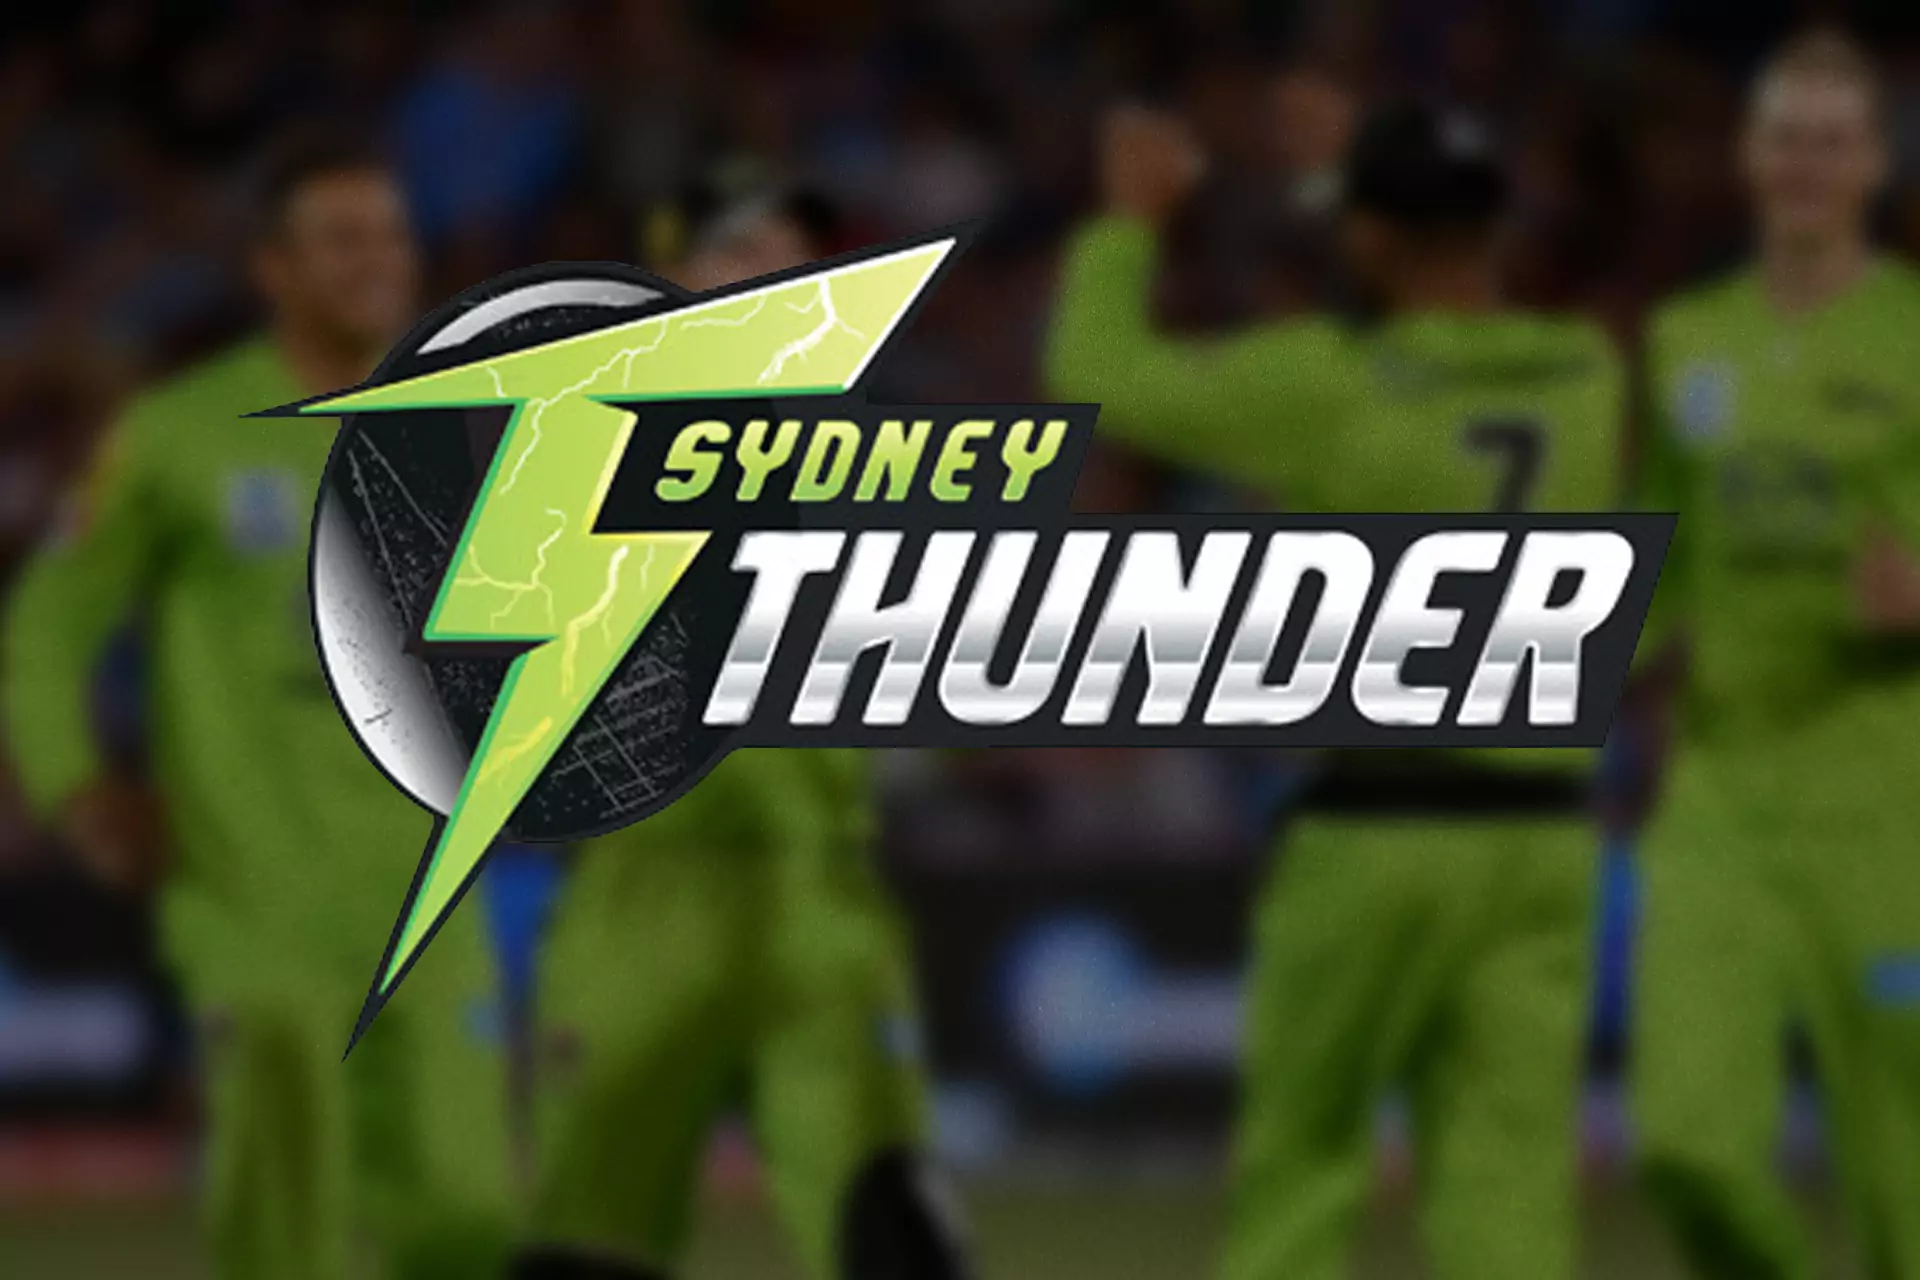 The Sydney Thunder are also based in Sydney and participate in the BBL.